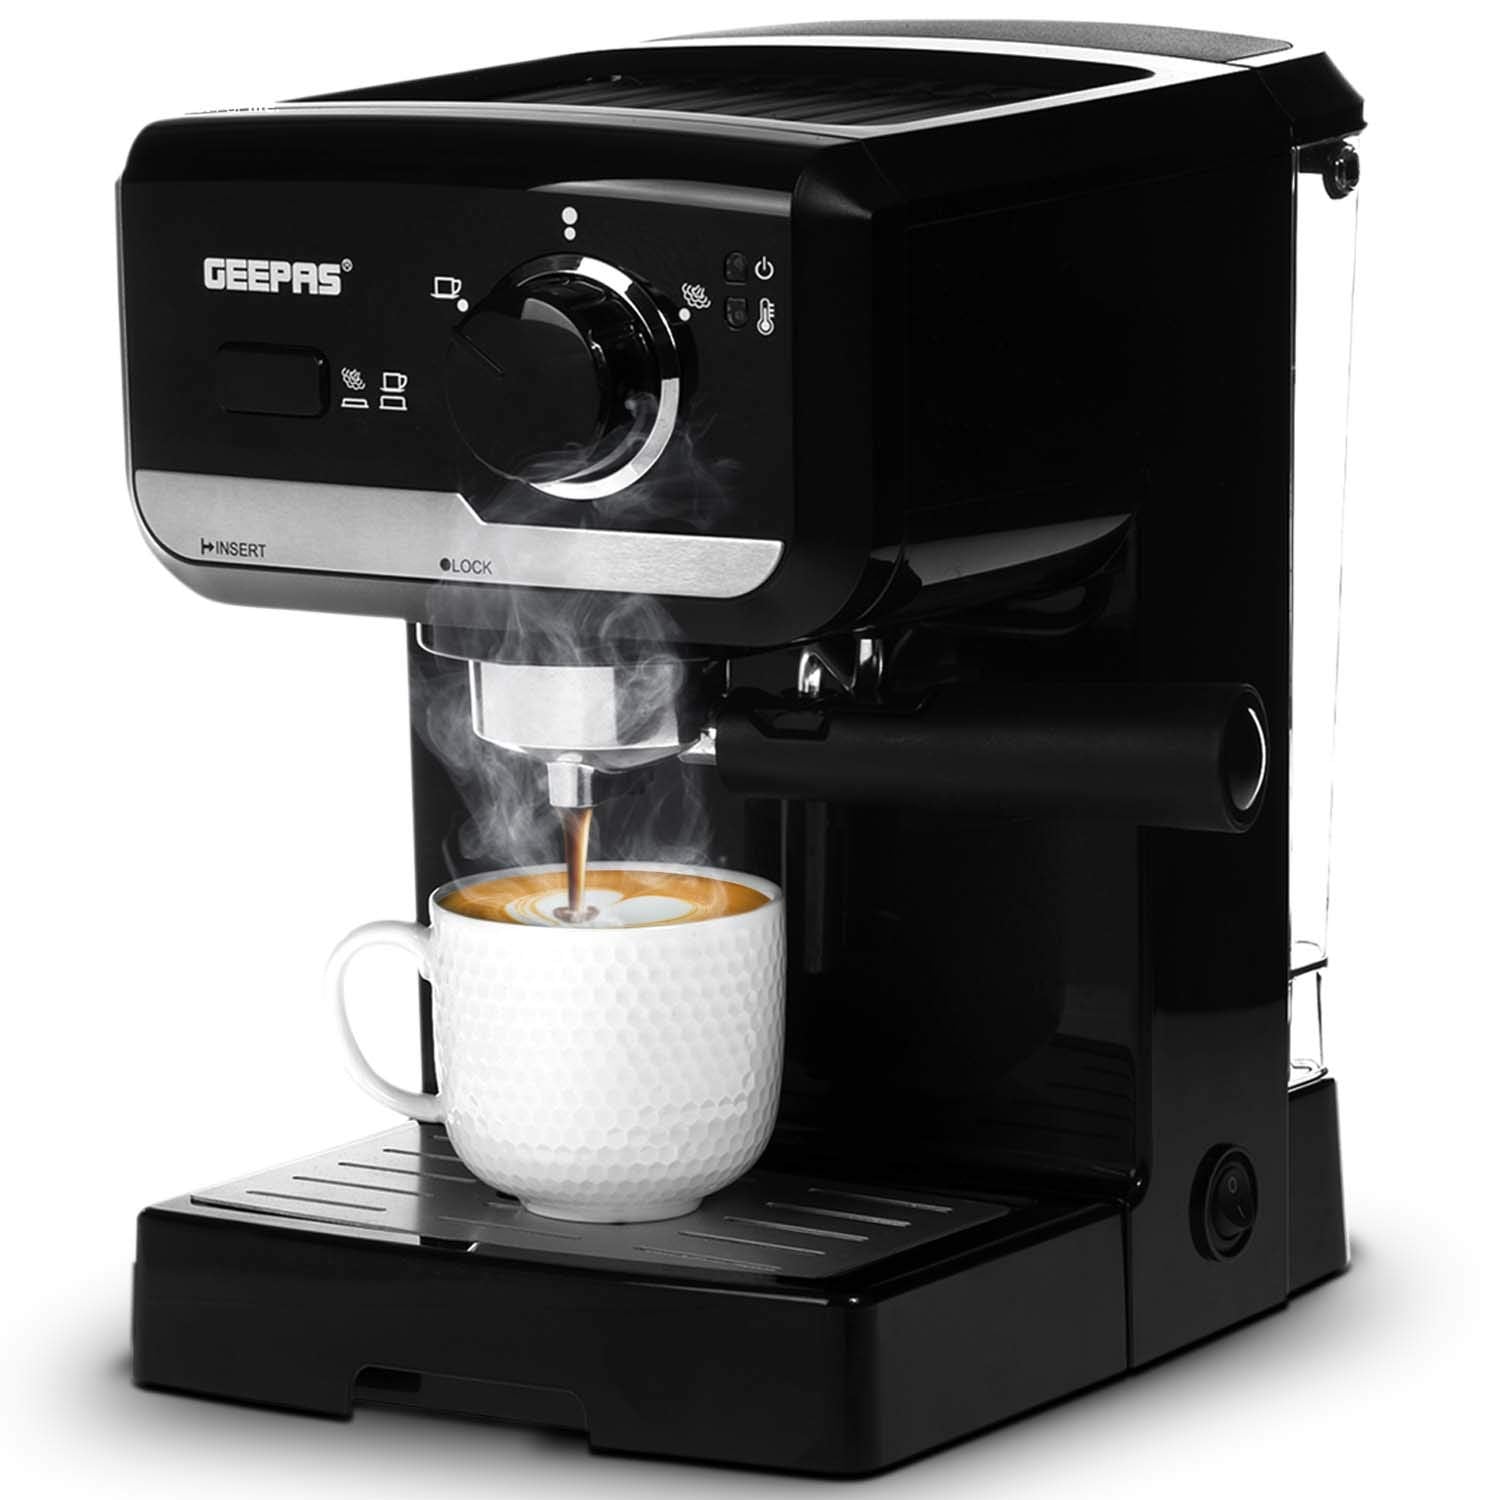 Geepas GCM 6108 Automatic Espresso Coffee Machine Cappuccino and Cafe Latte Maker